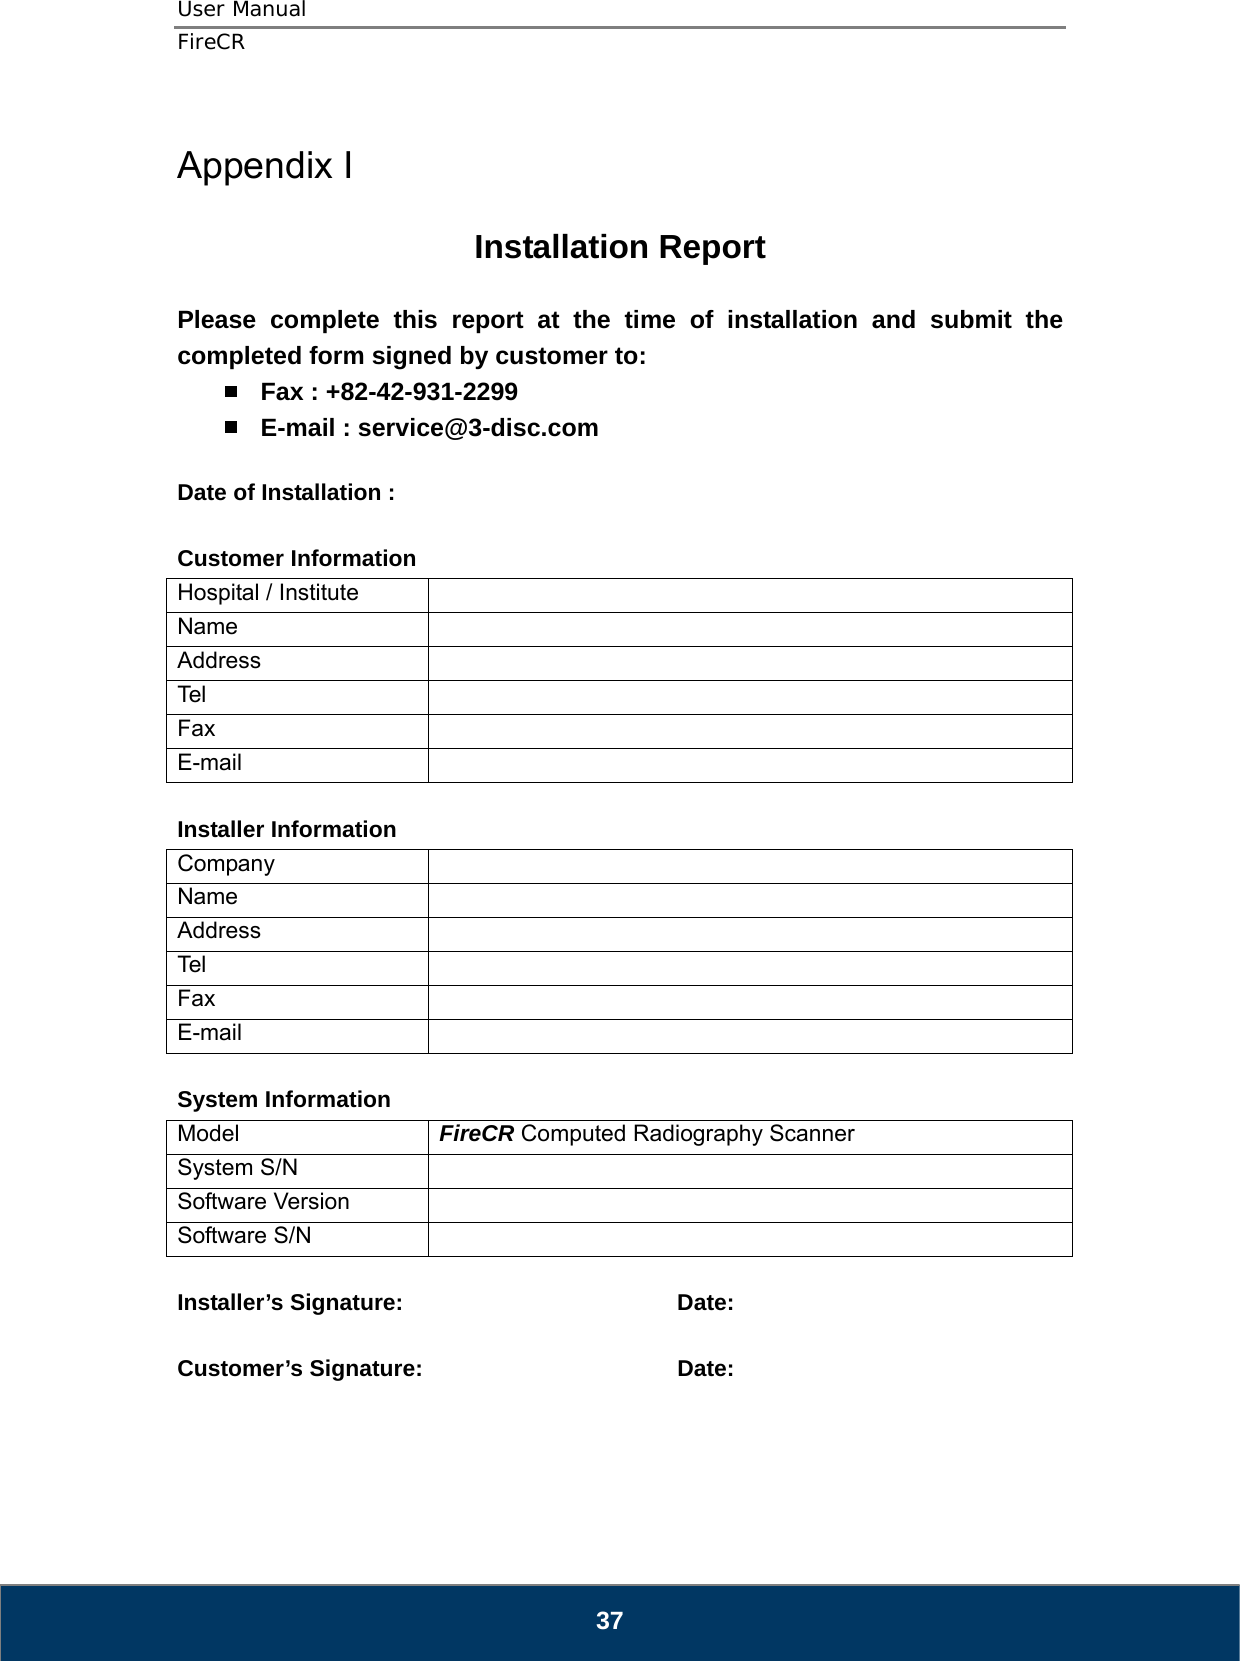 User Manual  FireCR   37  Appendix I  Installation Report  Please complete this report at the time of installation and submit the completed form signed by customer to:  Fax : +82-42-931-2299  E-mail : service@3-disc.com  Date of Installation :    Customer Information Hospital / Institute   Name  Address  Tel   Fax  E-mail   Installer Information Company  Name  Address  Tel   Fax  E-mail   System Information Model  FireCR Computed Radiography Scanner System S/N   Software Version   Software S/N    Installer’s Signature:    Date:  Customer’s Signature:       Date:      